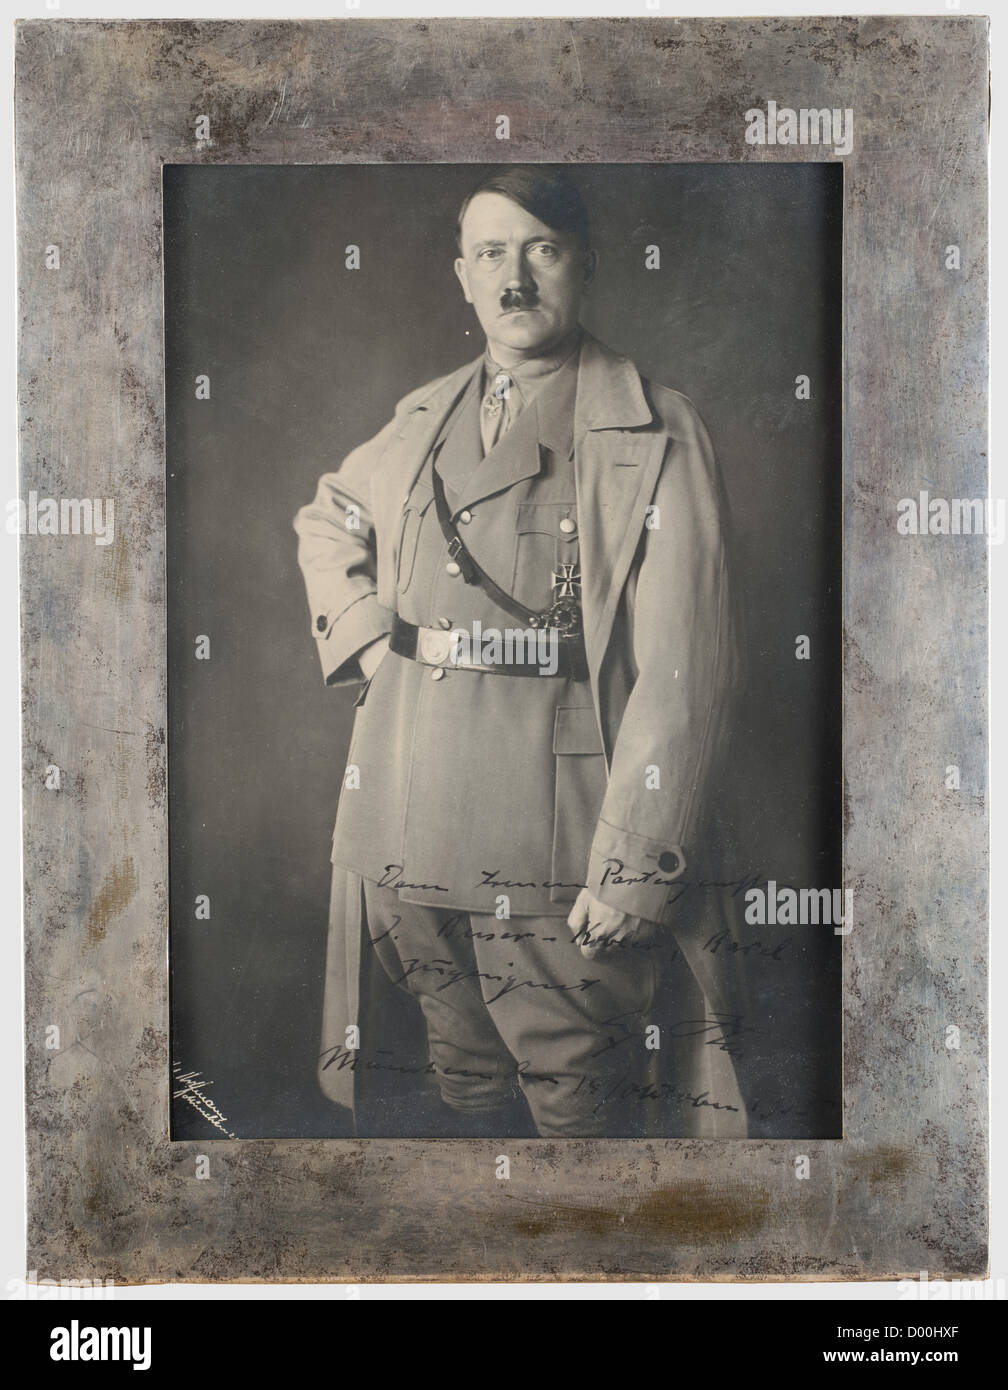 Jacques Buser - Kobler (BUKO) - a dedication photo in silver frame presented by Hitler to BUKO in 1935, Large format Hoffmann Portrait (aprox. 22.5 x 15.5 cm / slightly trimmed) with superimposed photographers' signature on the left side. Hitler in party uniform with Iron Cross 1st Class and Wound Badge in Black. The lower right with handwritten dedication in ink 'Dem treuen Parteigenossen J. Buser - Kobler, Basel zugeeignet - Adolf Hitler - München den 14/Oktober 1935' (To the loyal Party Member…). Mounted in a plain silver glazed frame with stand on the rever, Stock Photo